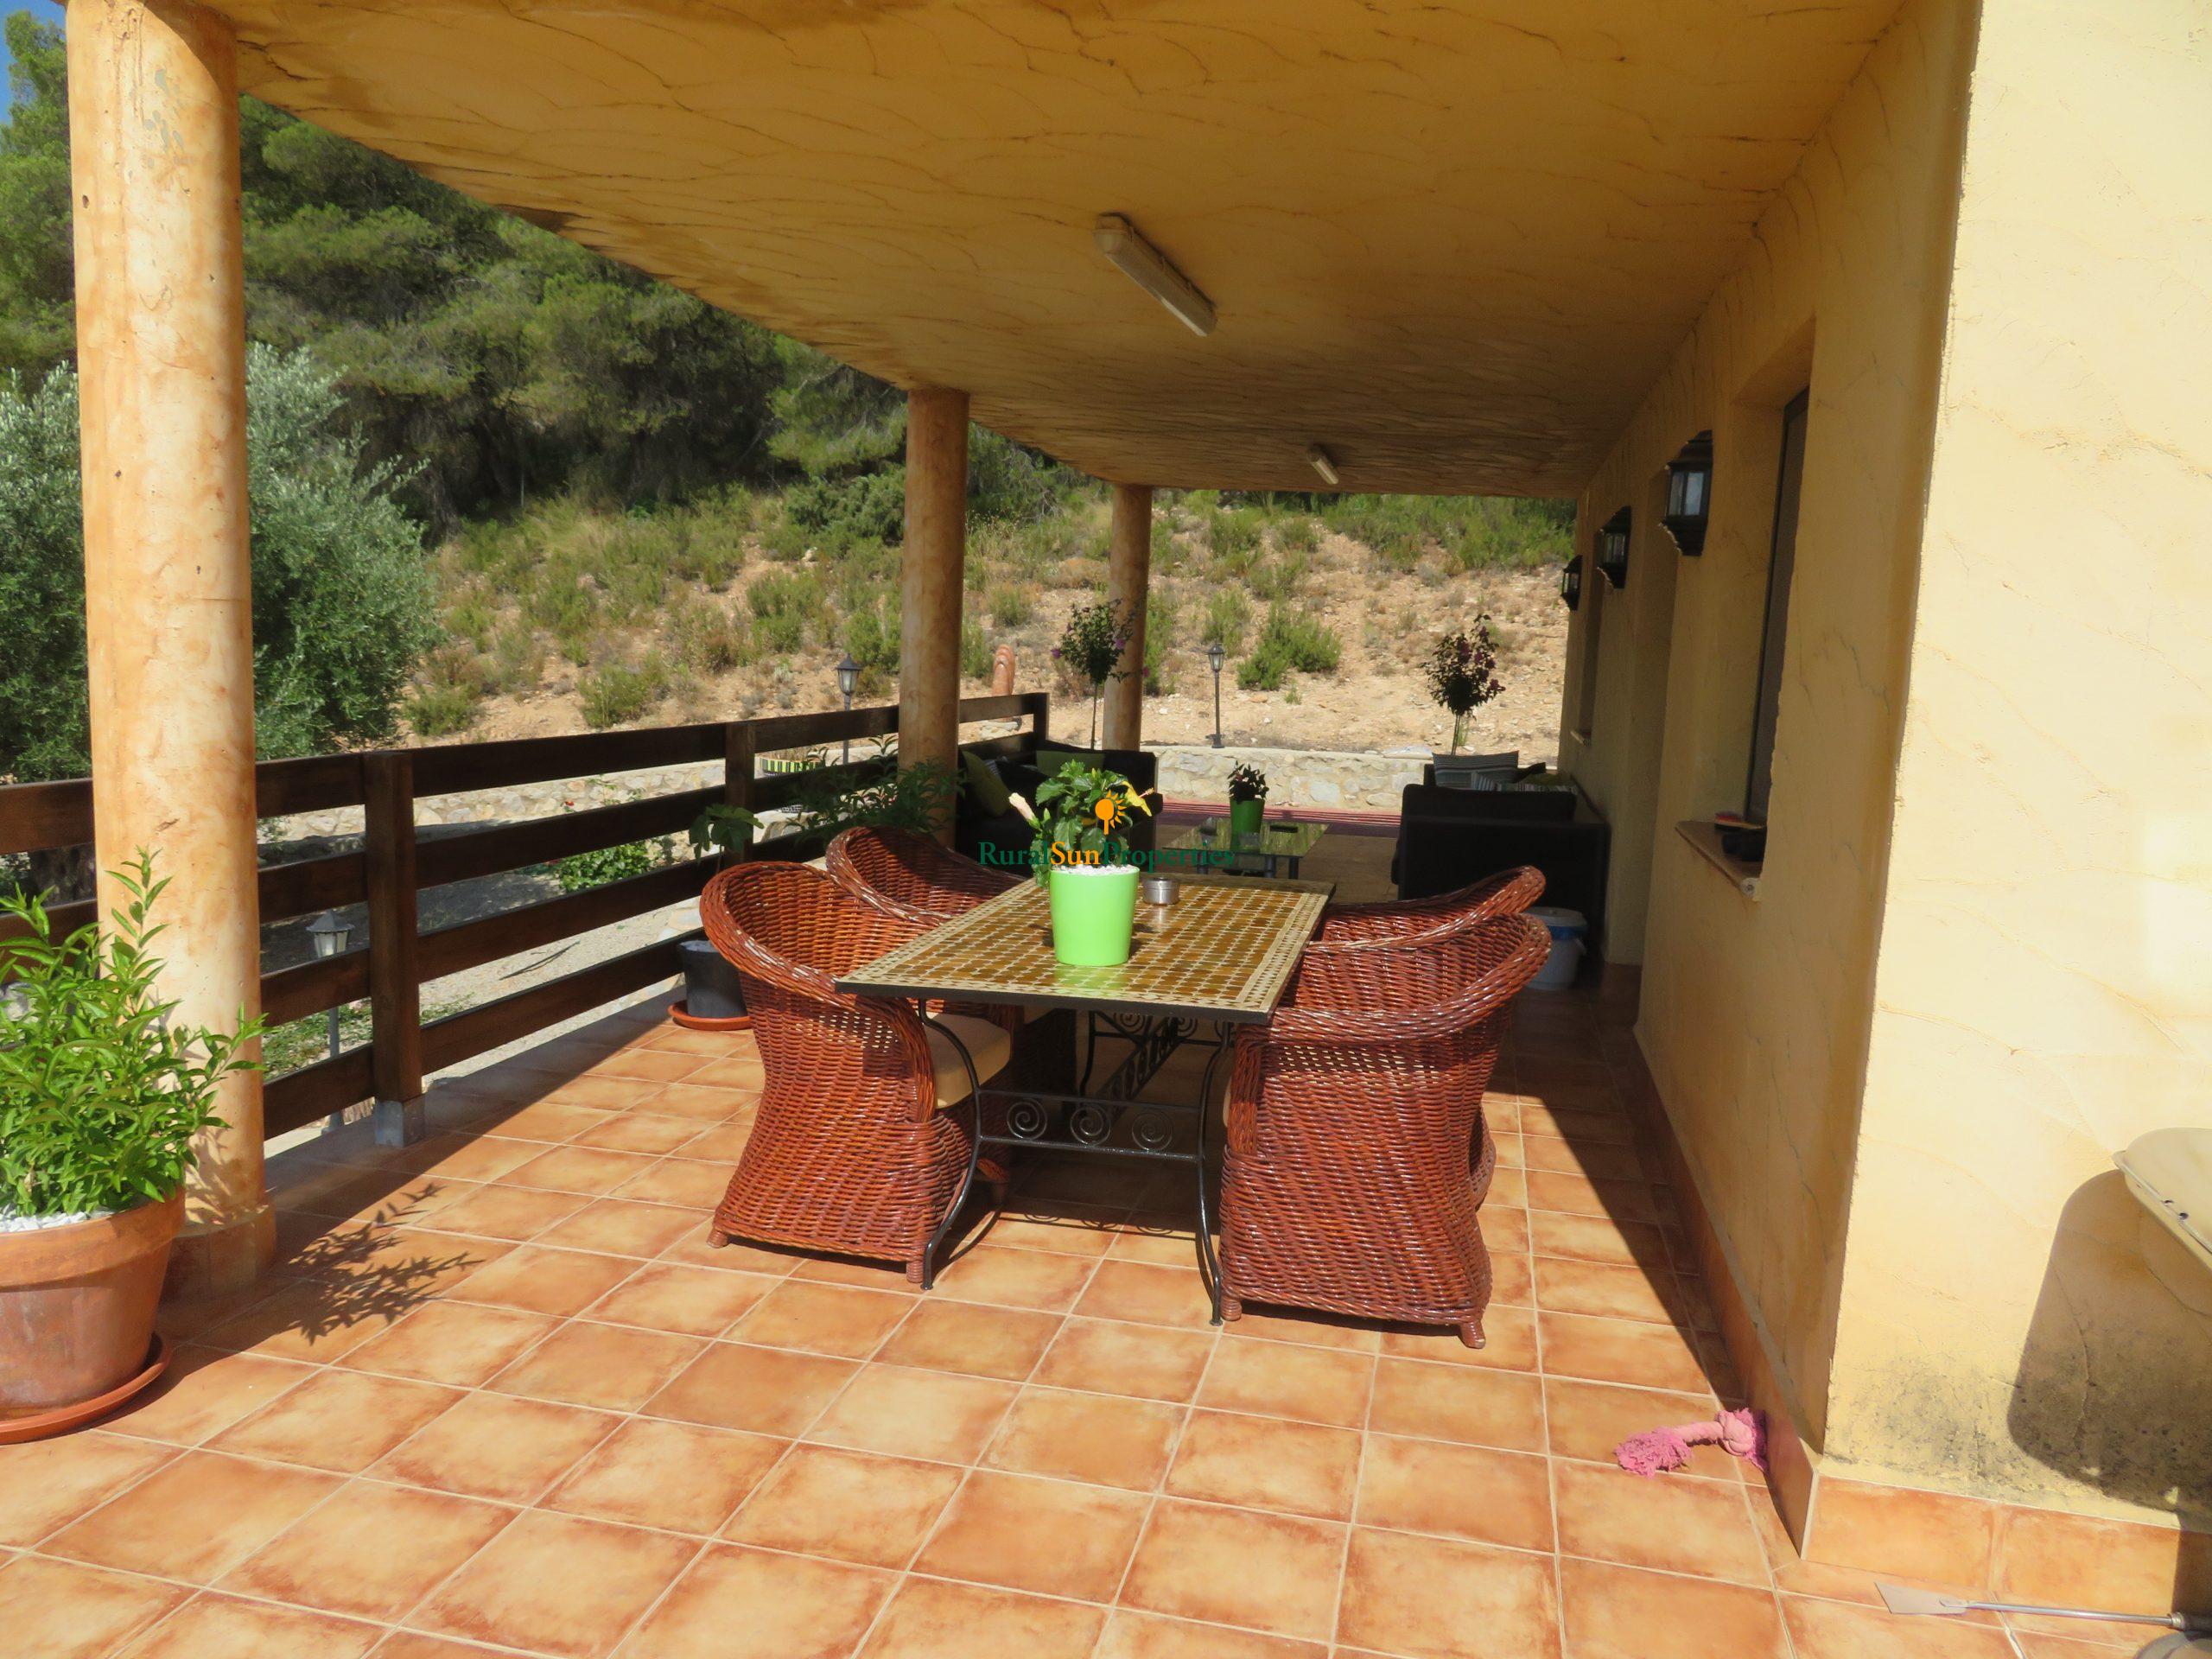 SOLD. Country property for sale in Bullas Murcia